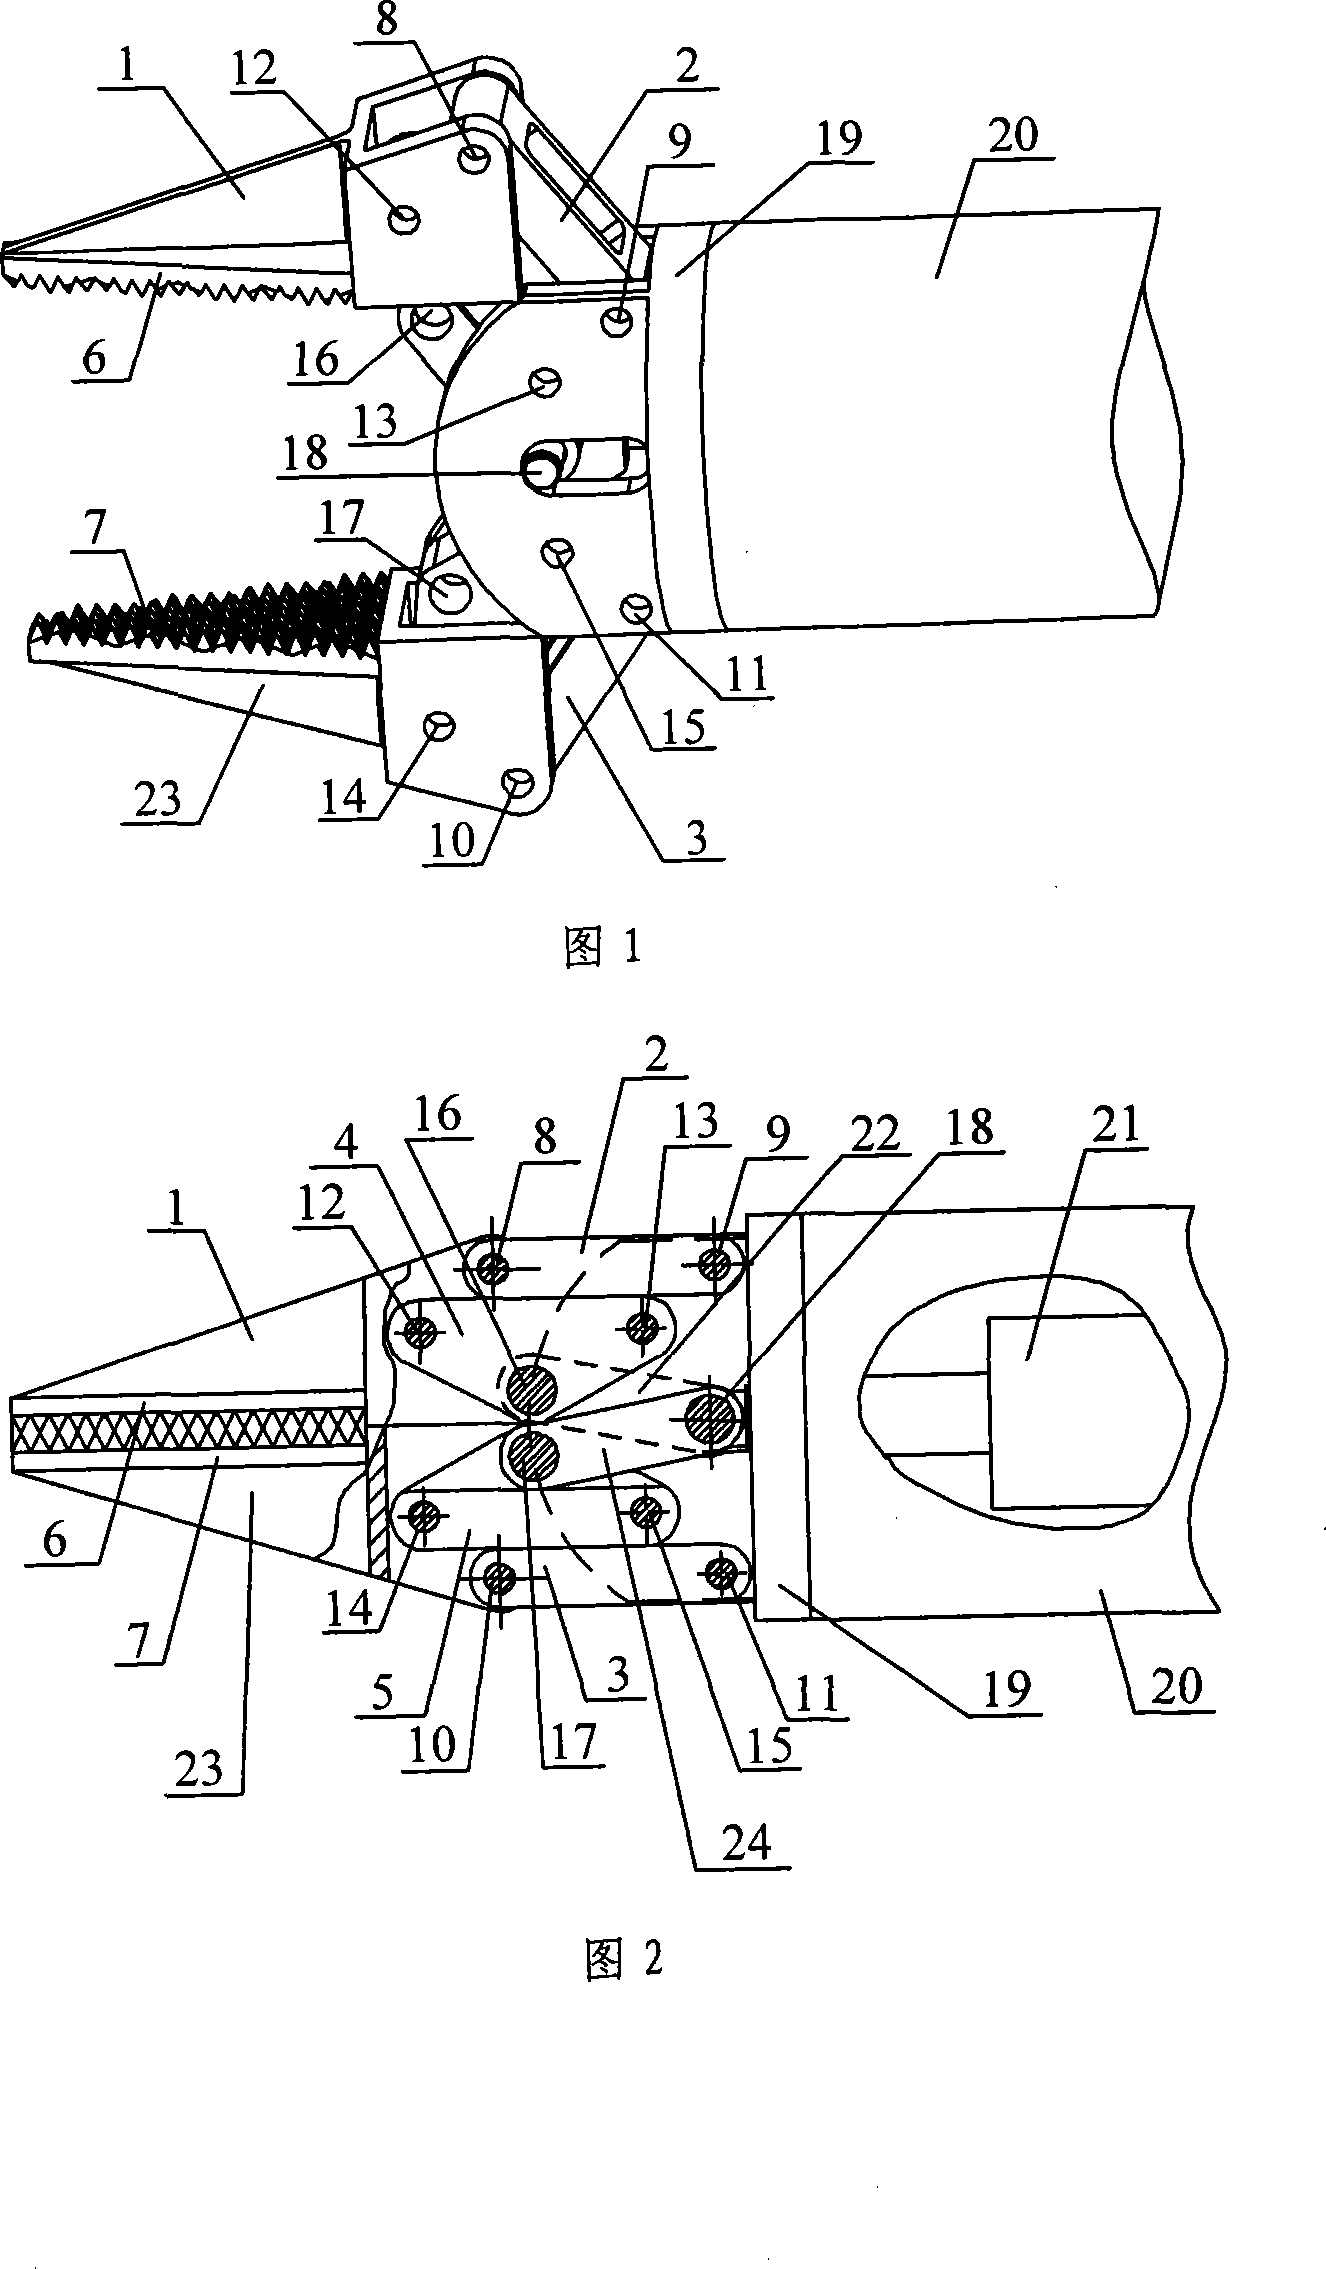 Submarine mechanical claw structure